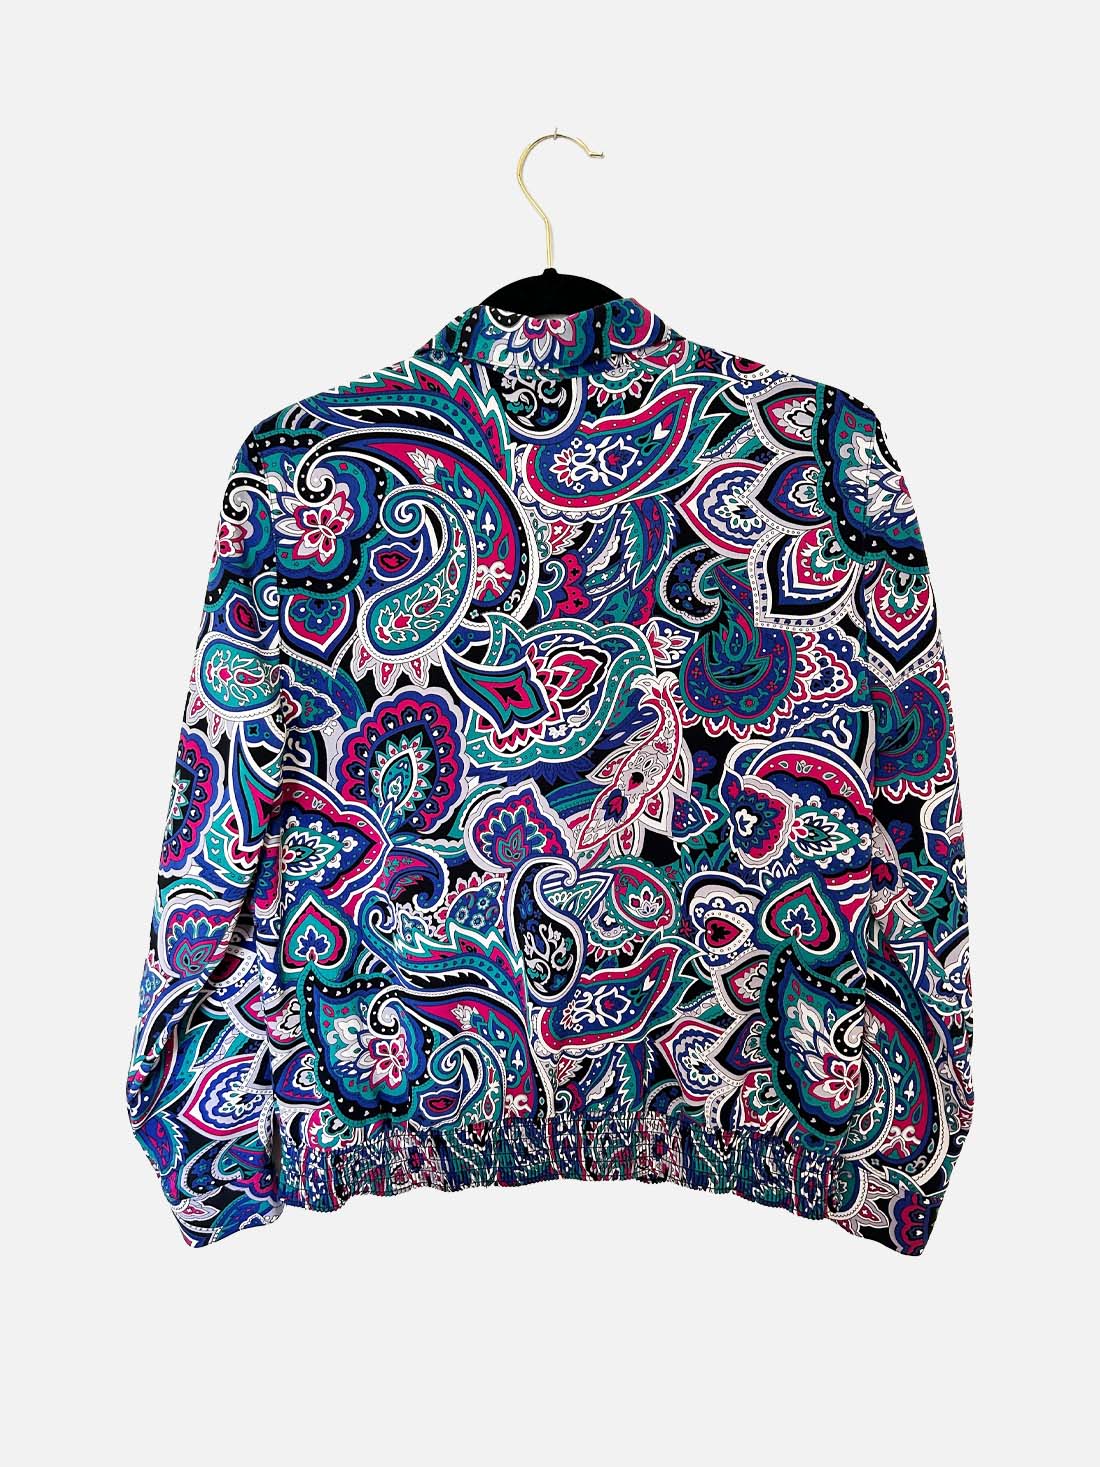 Paisley Multi Color Printed Blouse